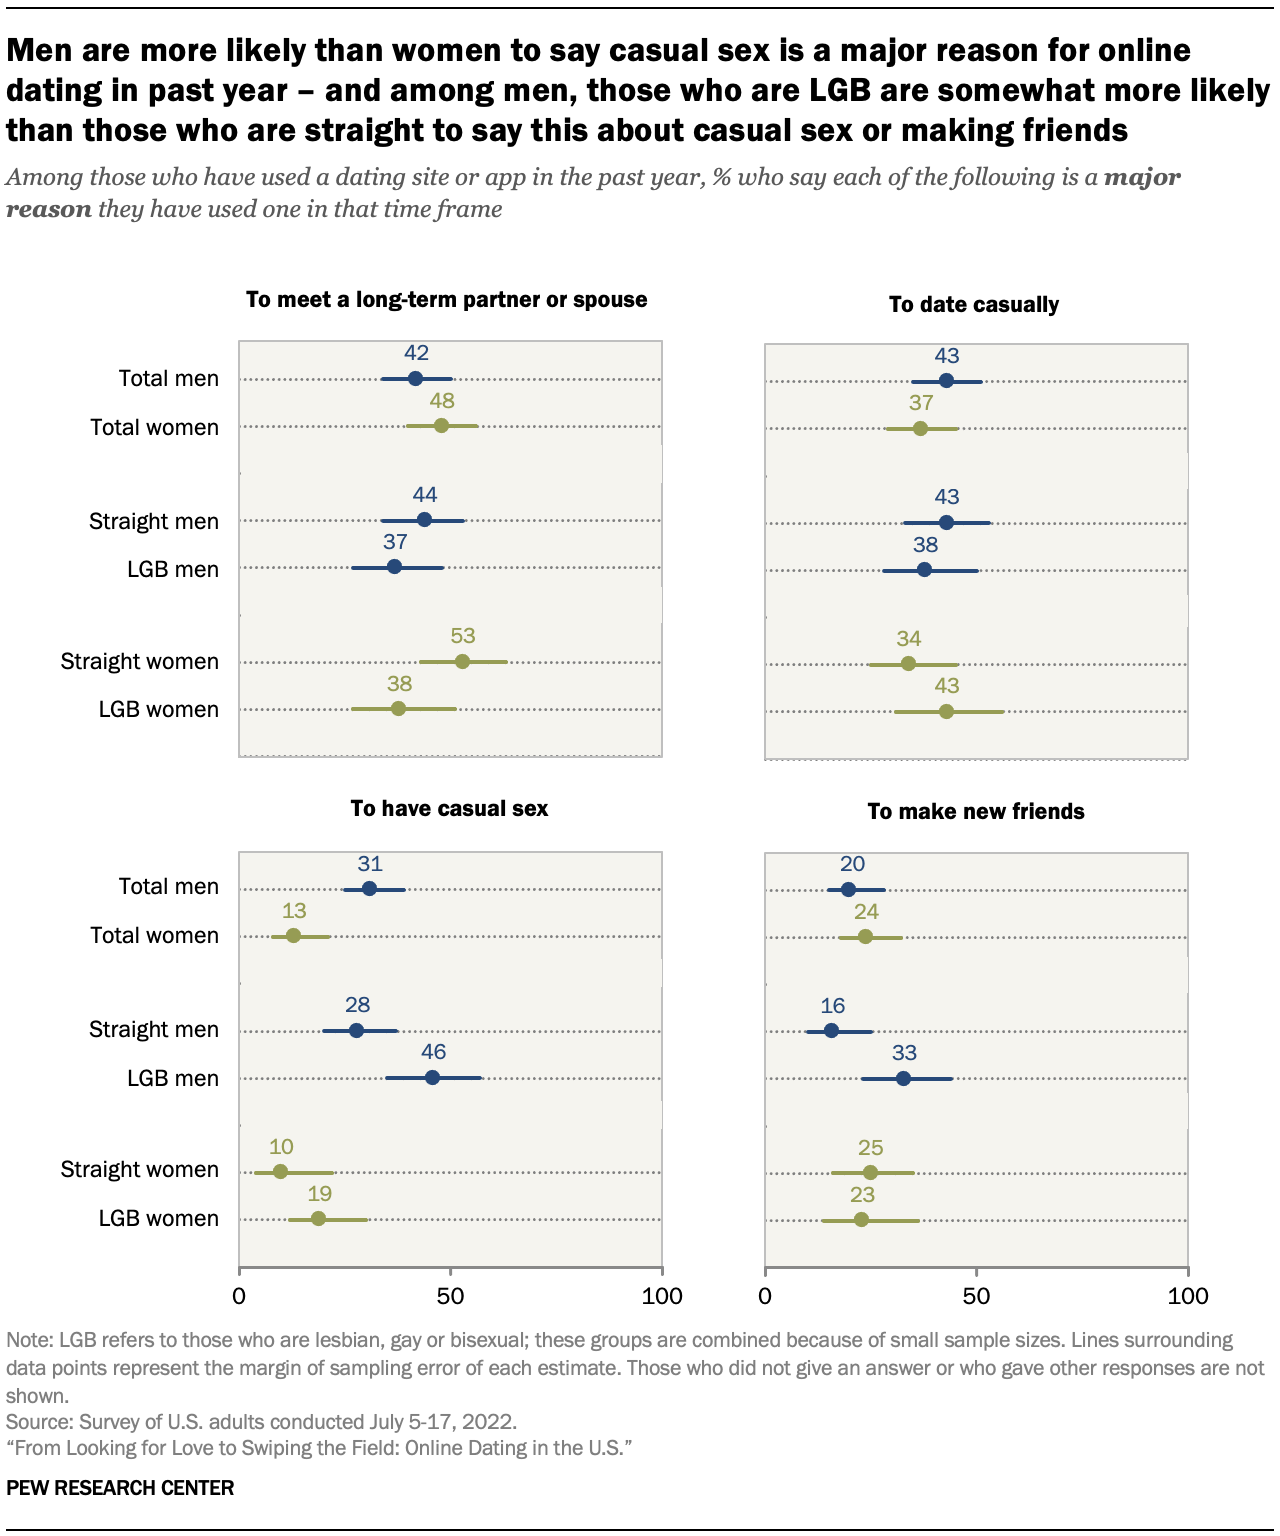 Men are more likely than women to say casual sex is a major reason for online dating in past year – and among men, those who are LGB are somewhat more likely than those who are straight to say this about casual sex or making friends